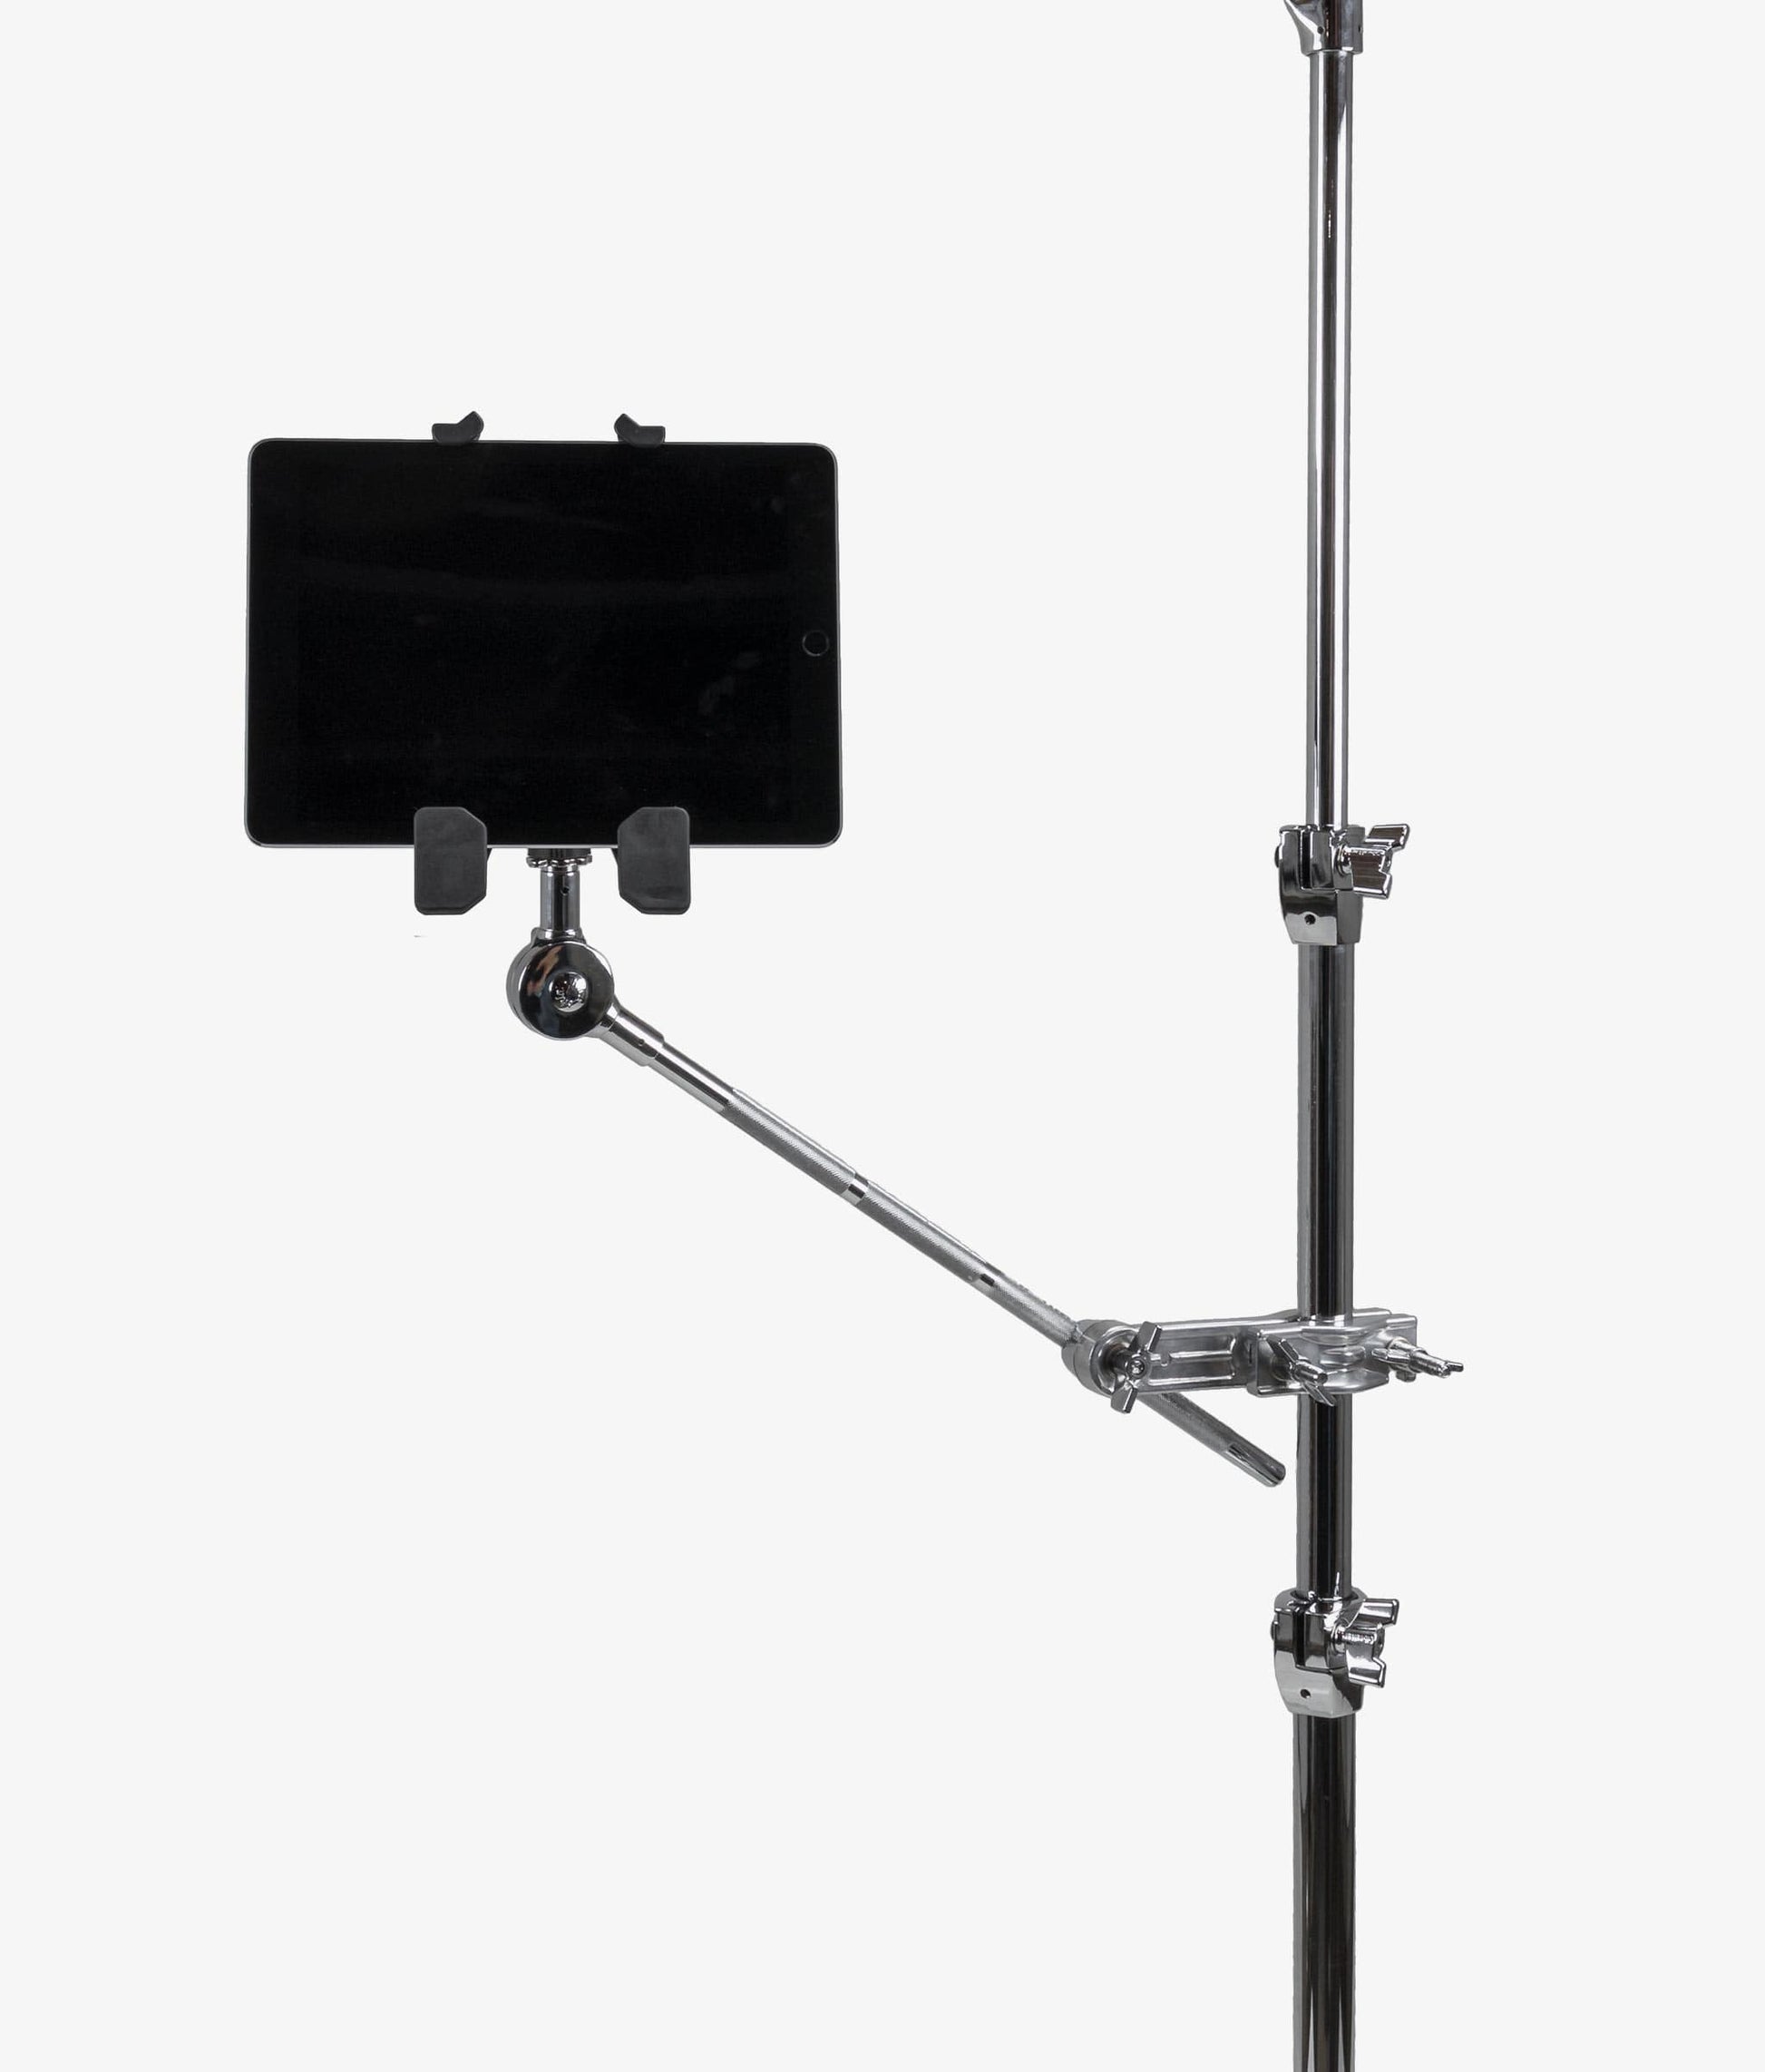 Gibraltar DJ Microphone Boom Arm and Clamp Pack